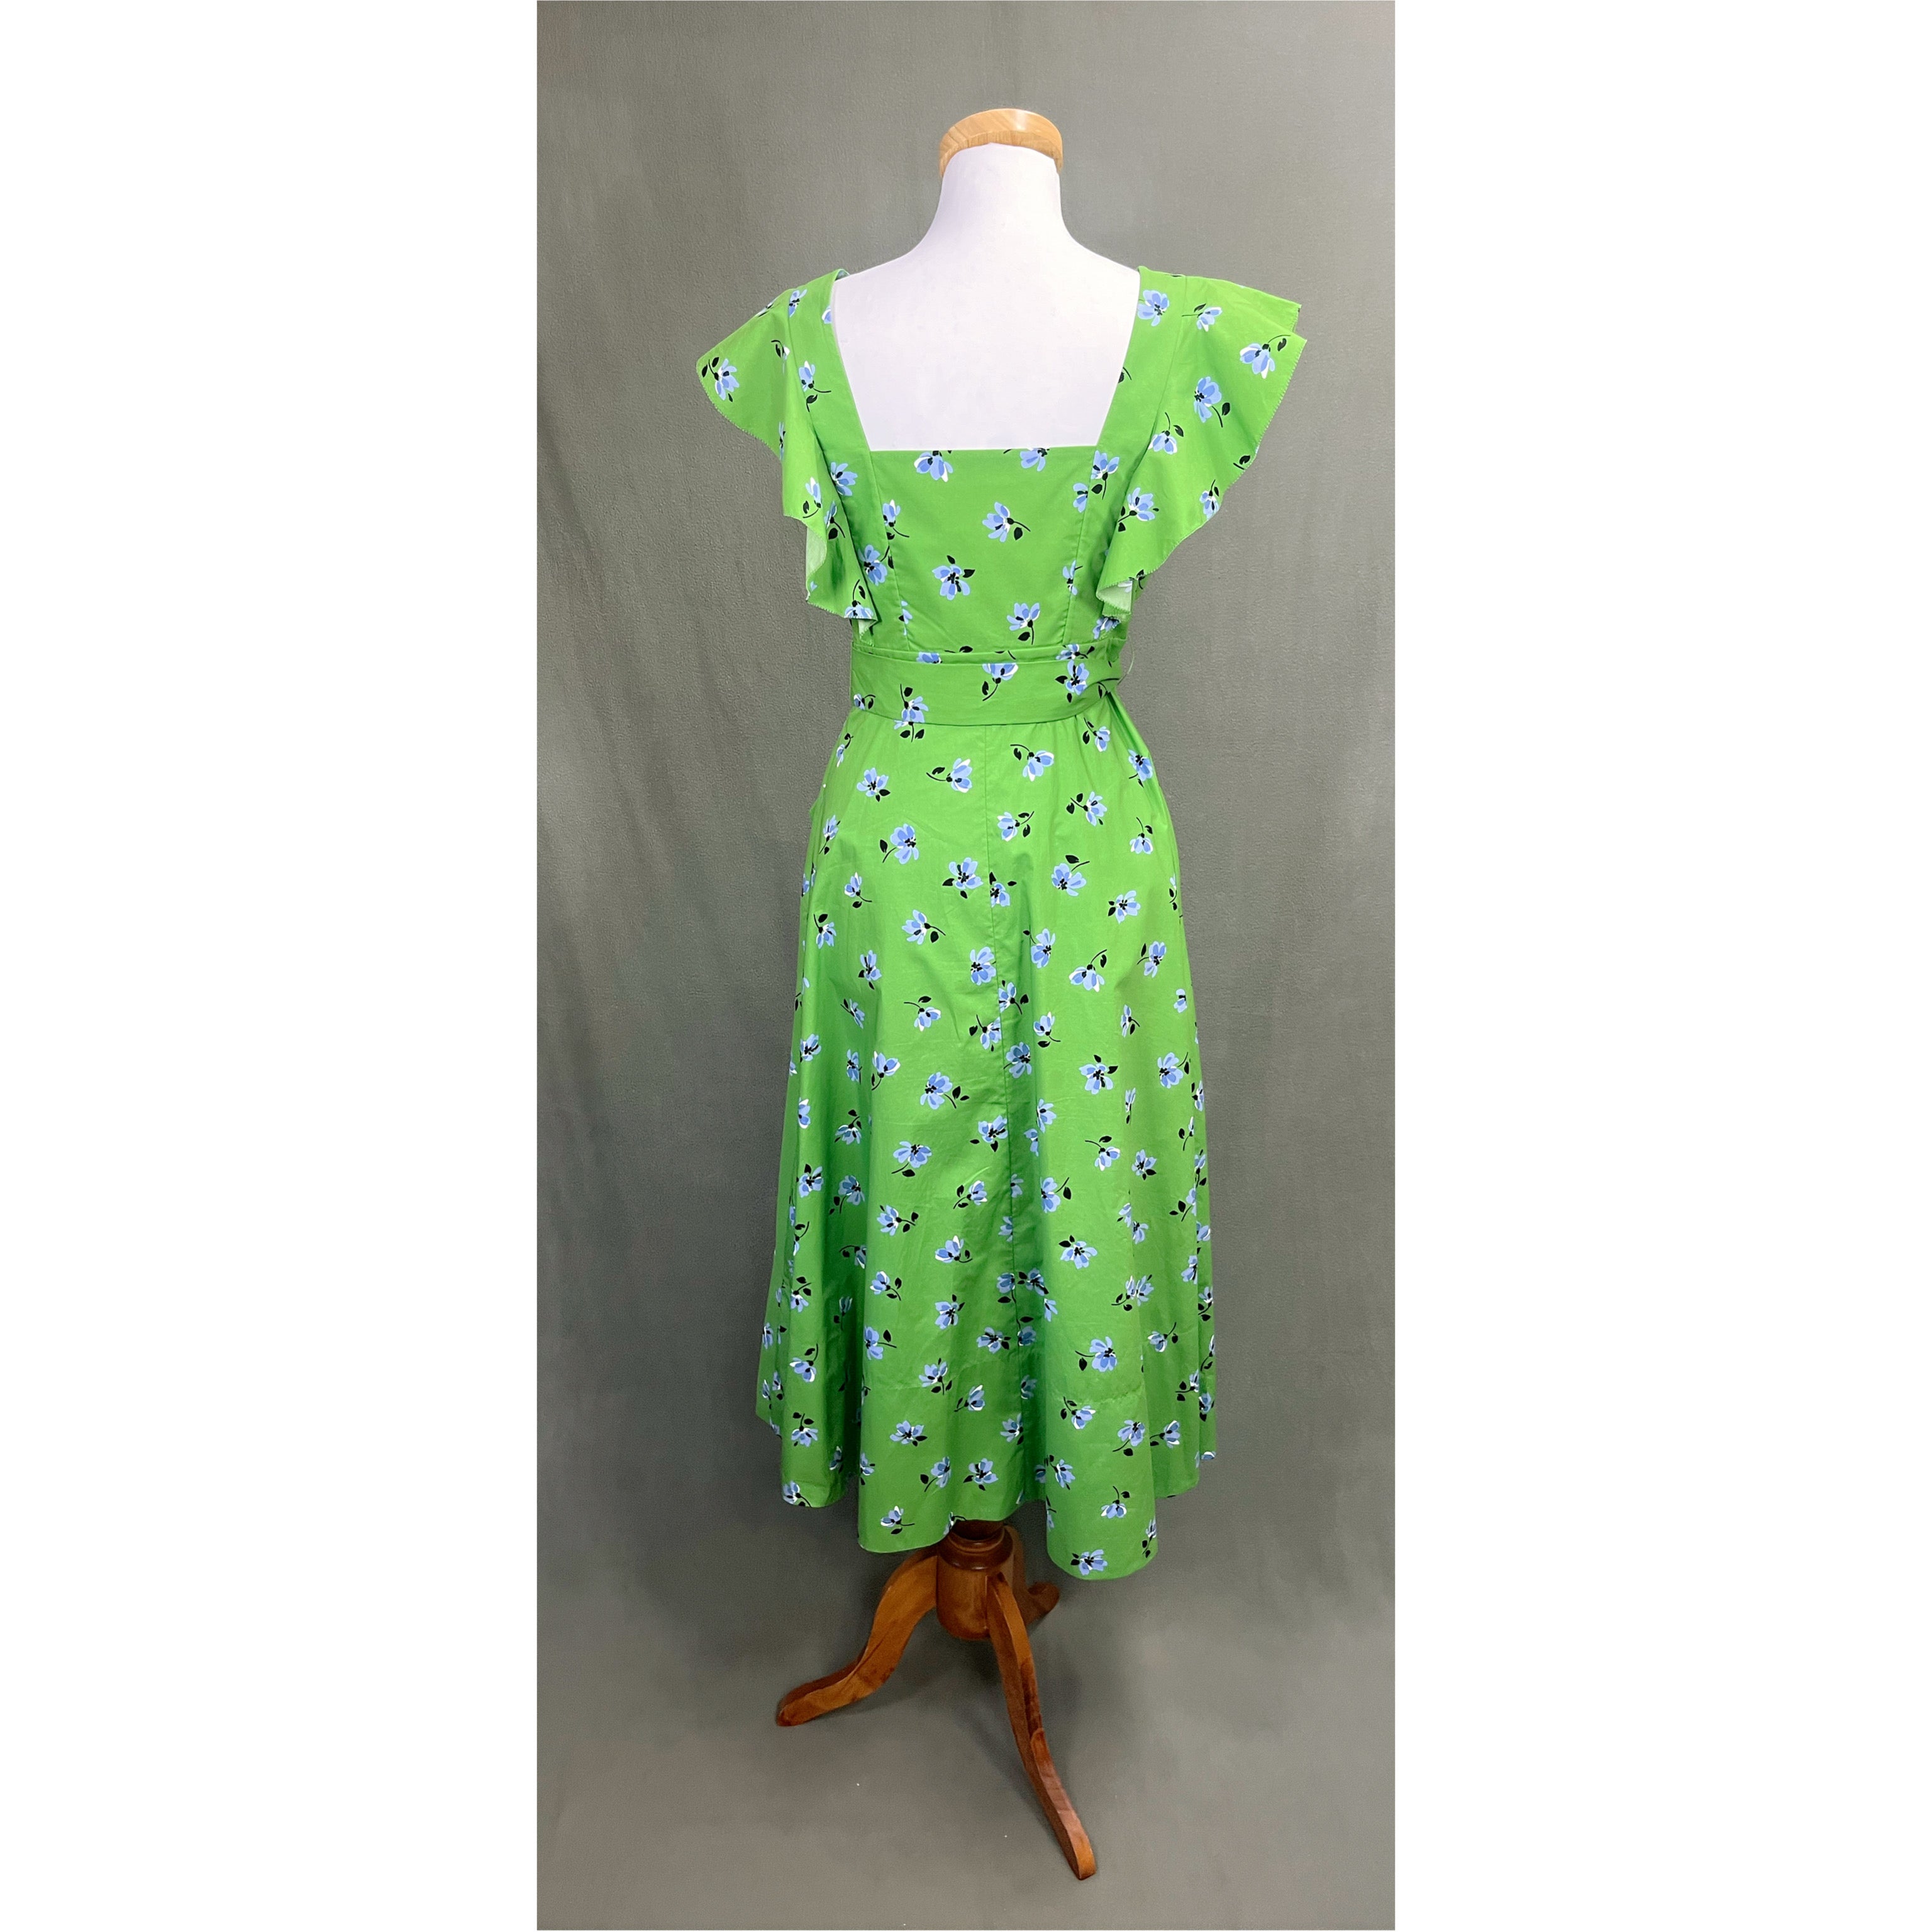 Kate Spade green & blue floral dress, size 4, NEW WITH TAGS!